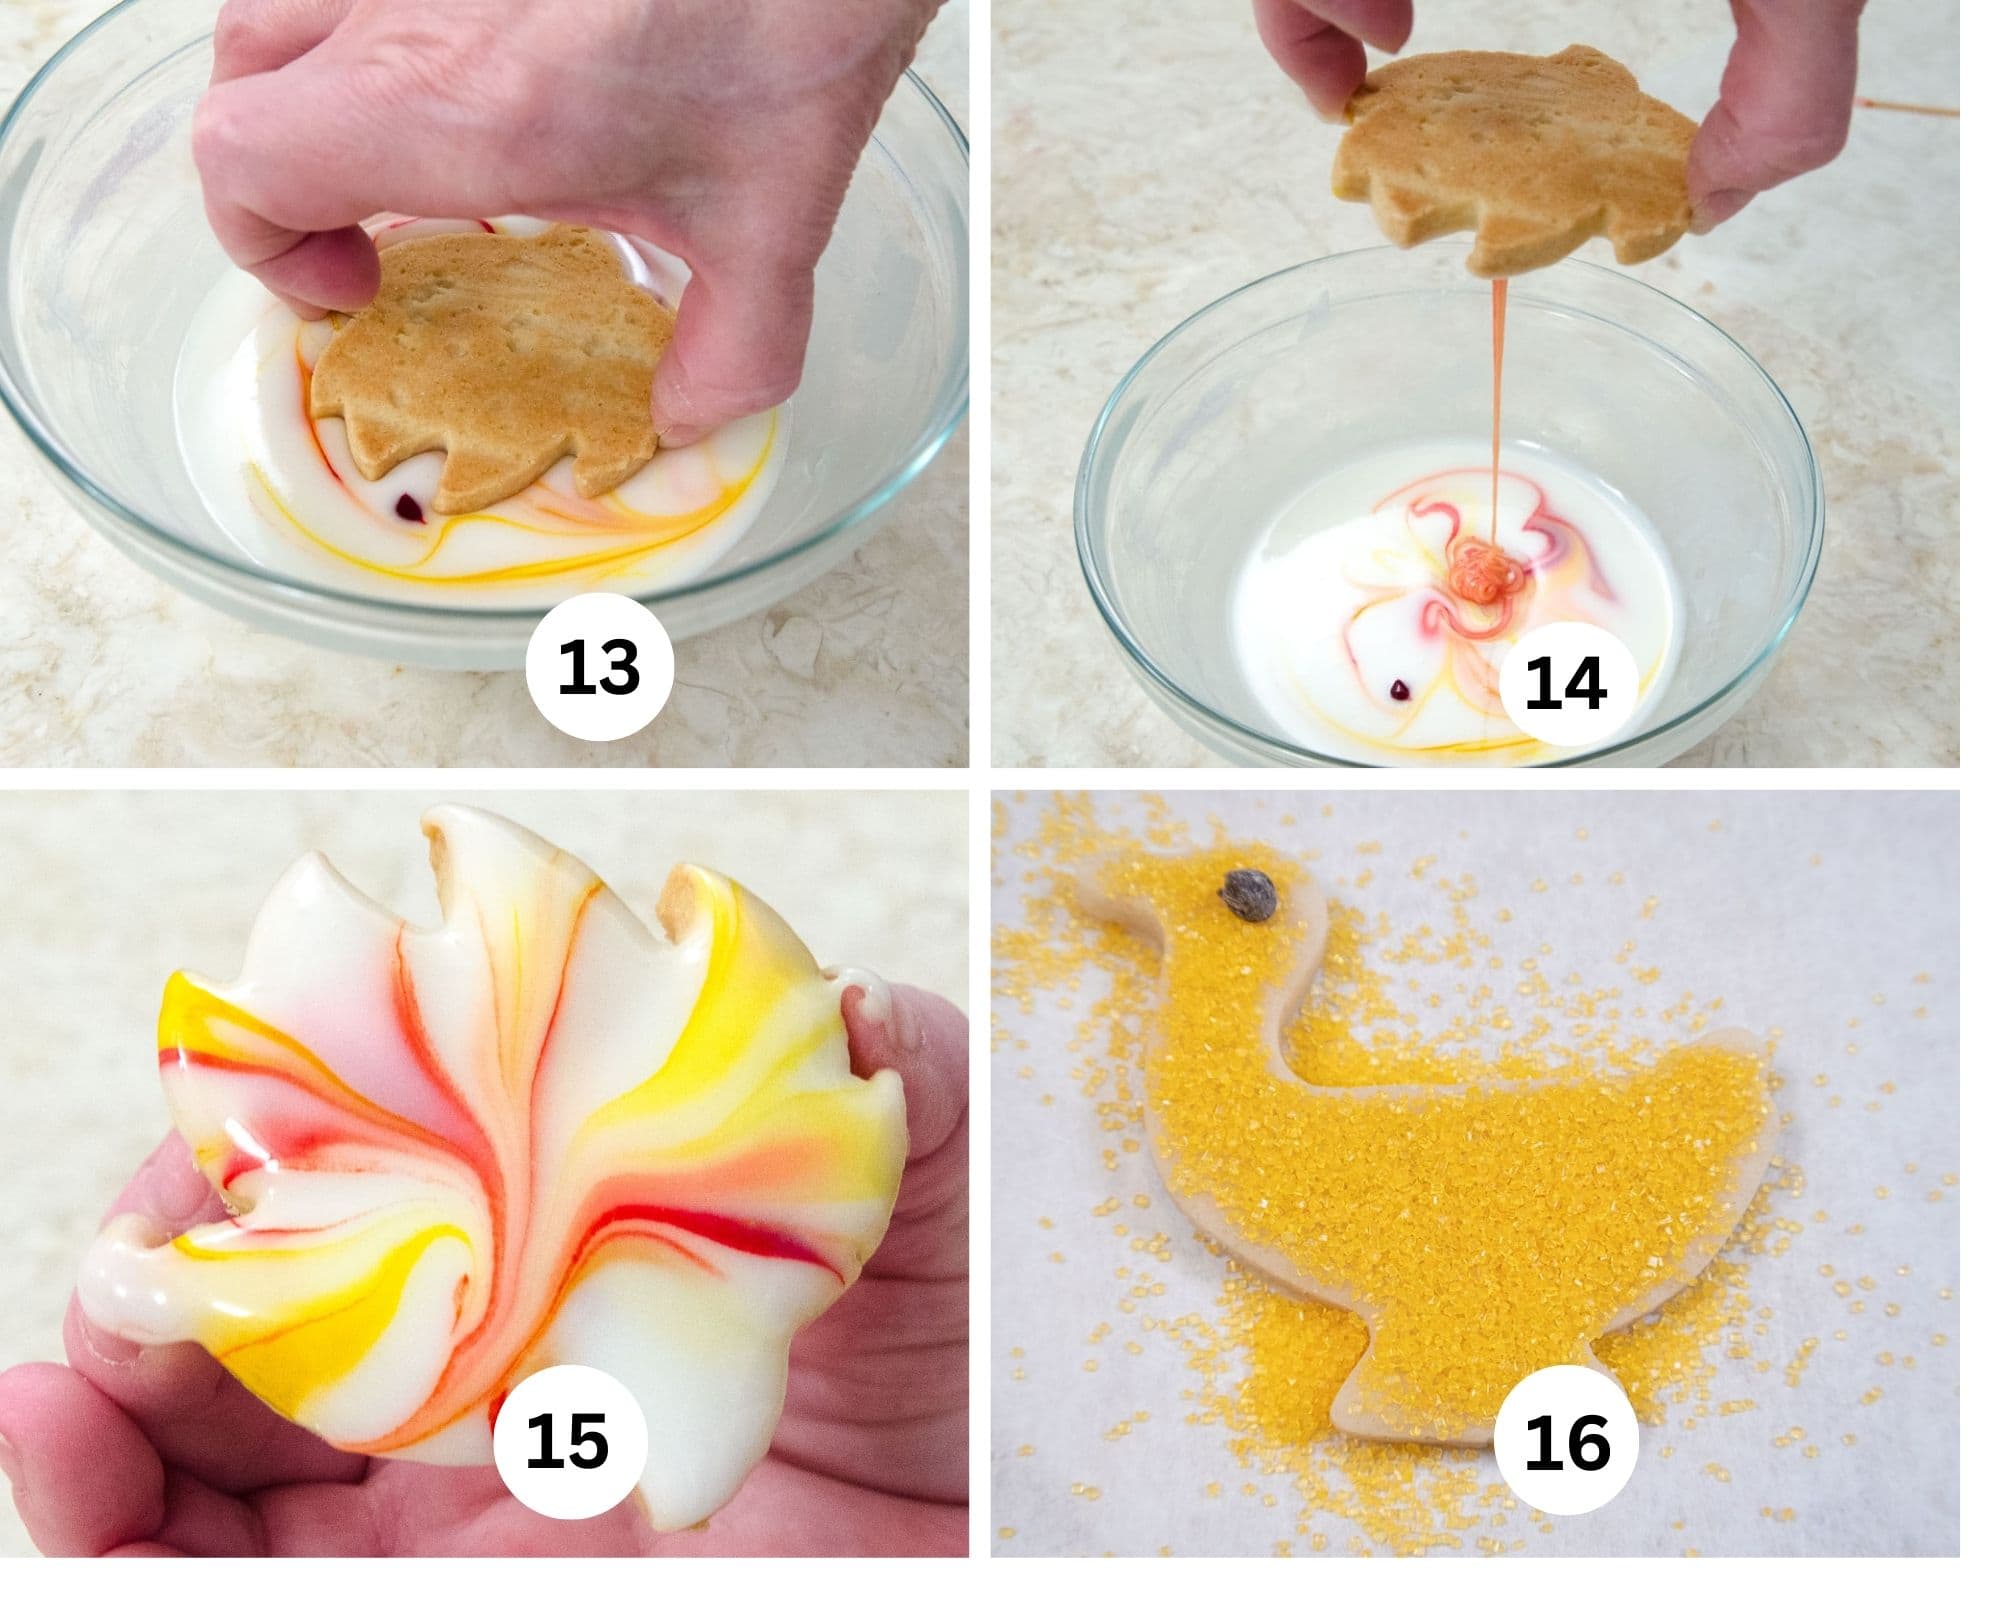 The final collage shows a cookie being dipped into the glaze, the glaze dripping off, the finished glazed cookie and a duck covered in yellow sugar crystals.